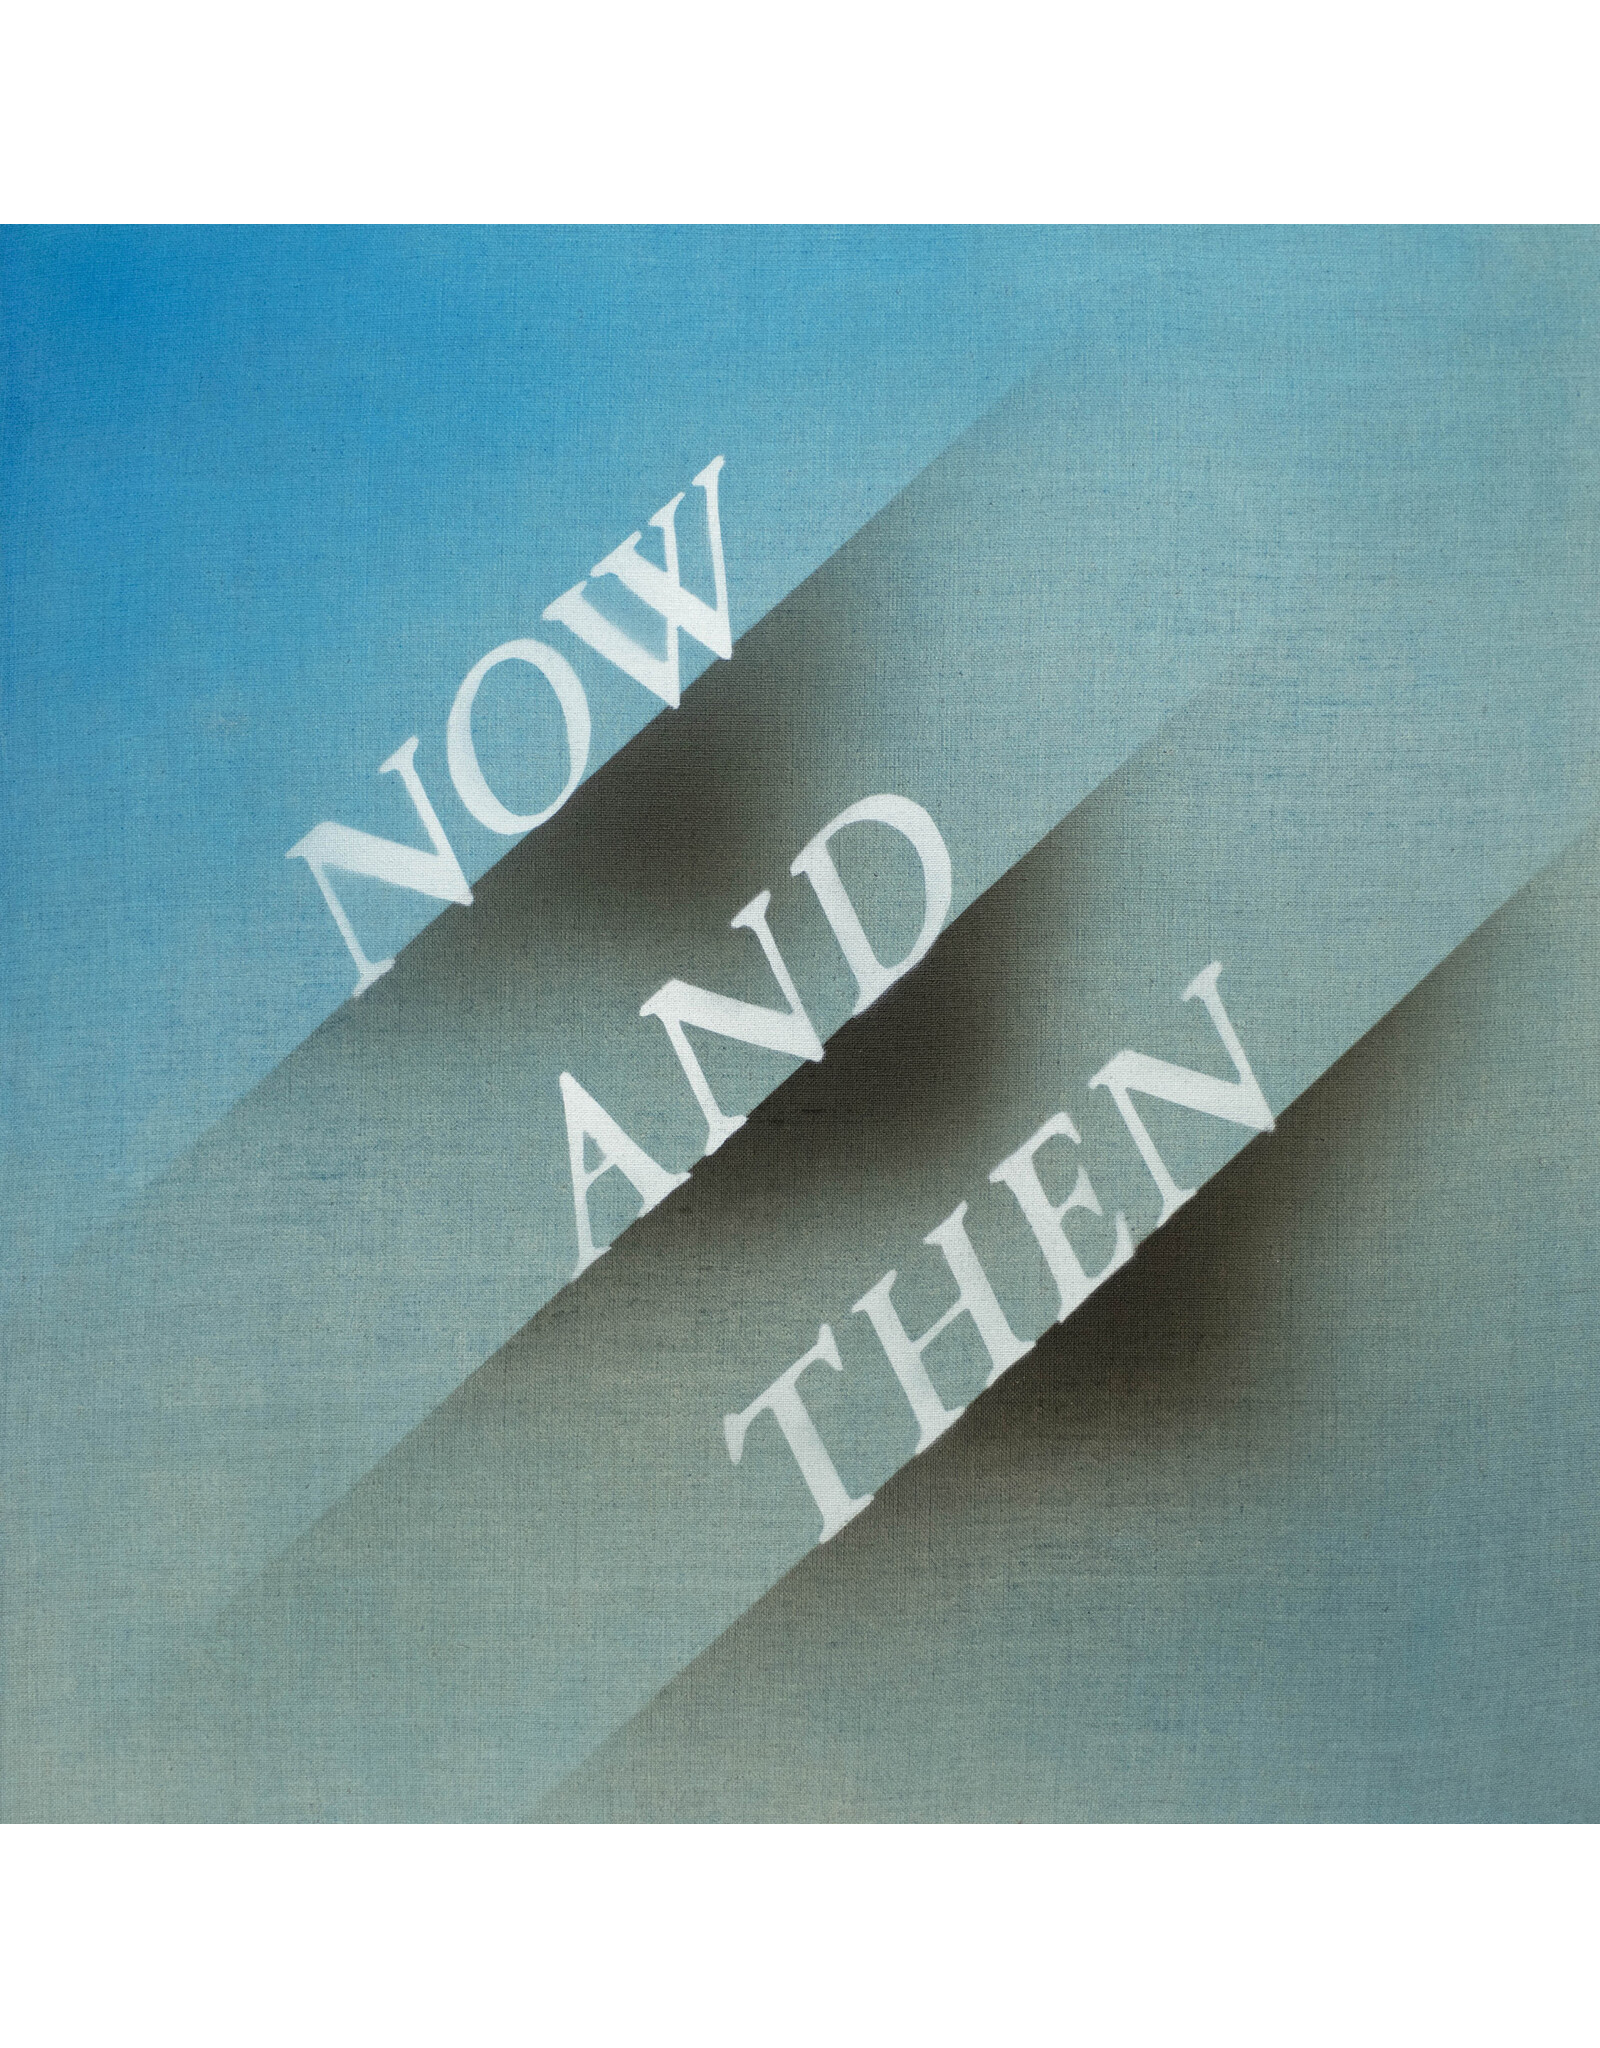 Beatles - Now And Then (7" Single) [Clear Vinyl]